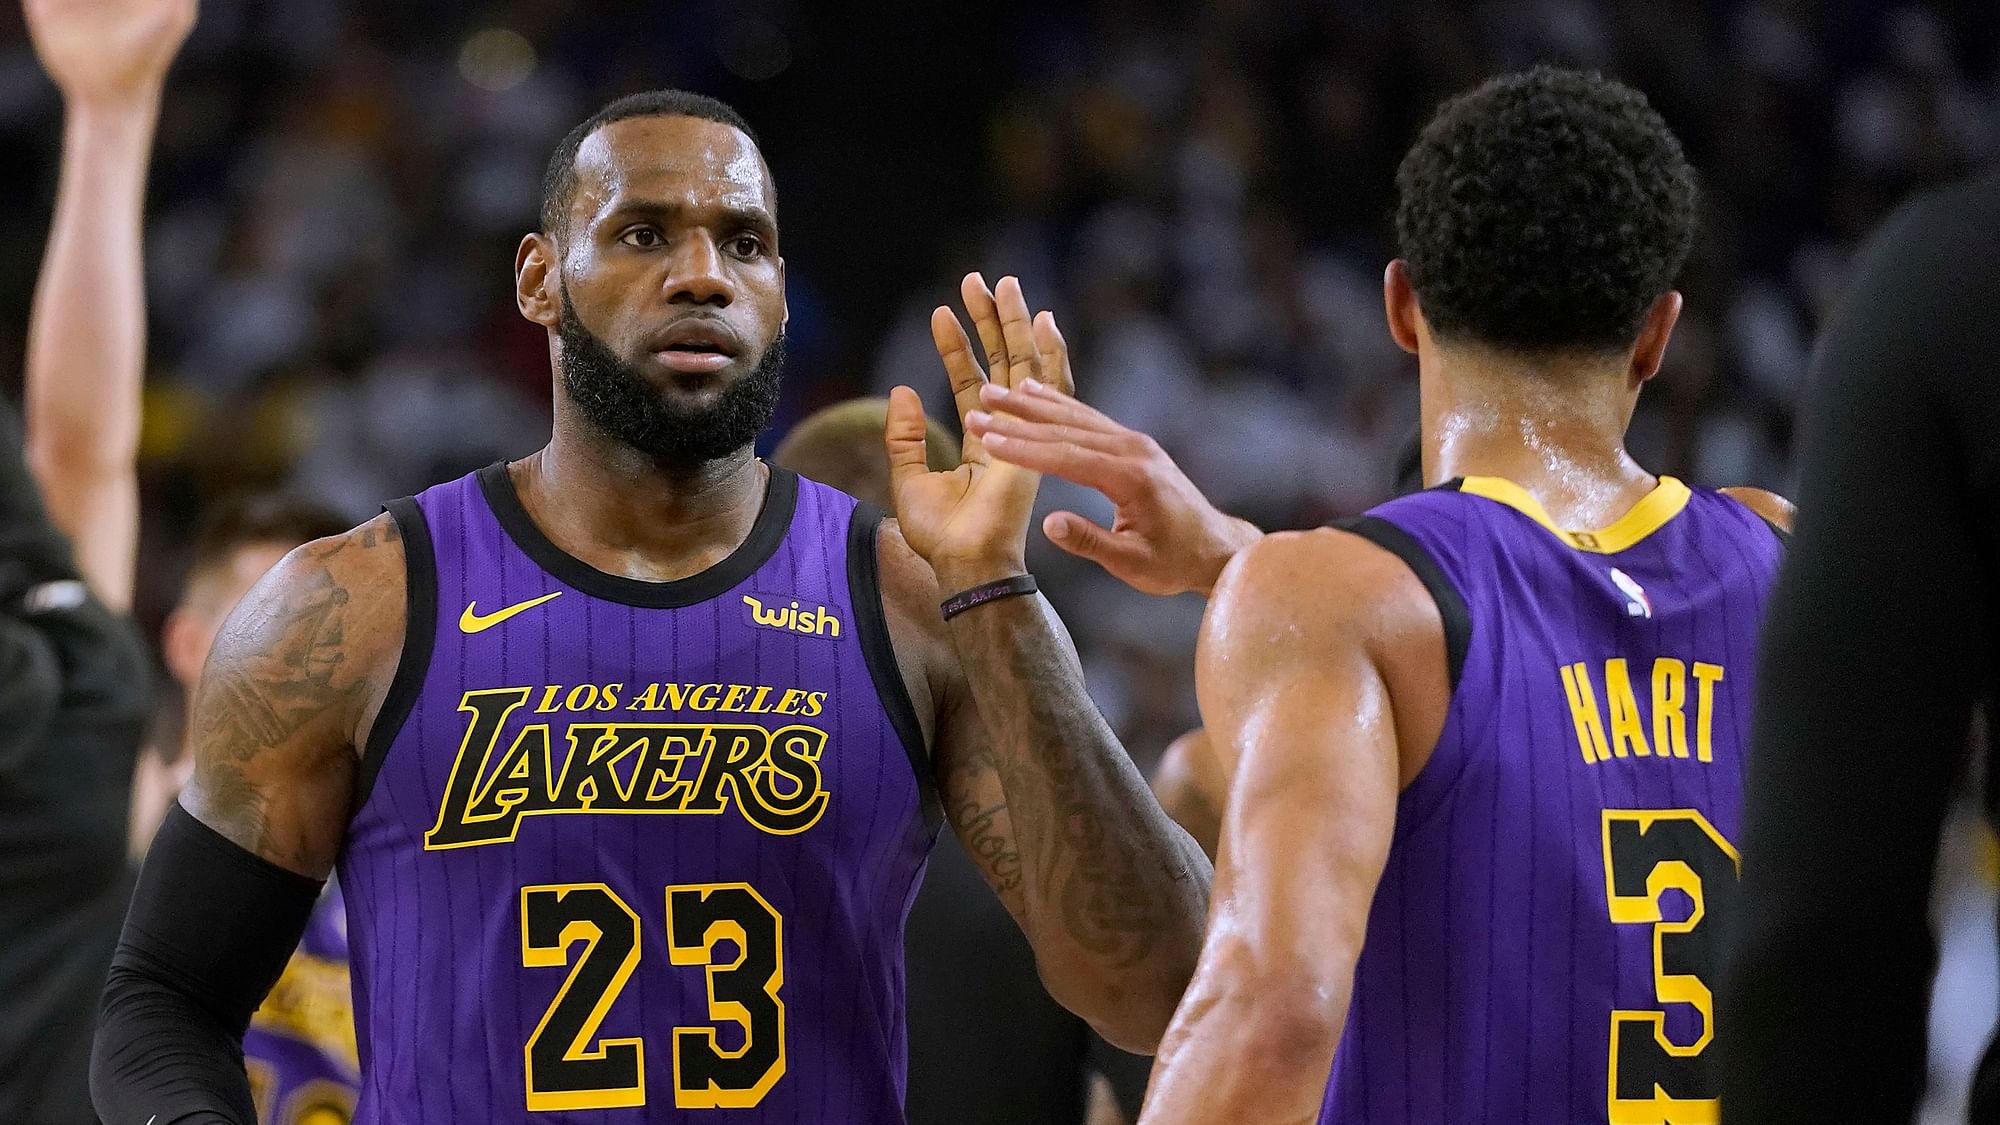 Los Angeles Lakers forward LeBron James (23) high-fives Josh Hart (3) at the end of the first half of the team’s NBA basketball game against the Golden State Warriors on Tuesday, Dec. 25, 2018, in Oakland, Calif.&nbsp;